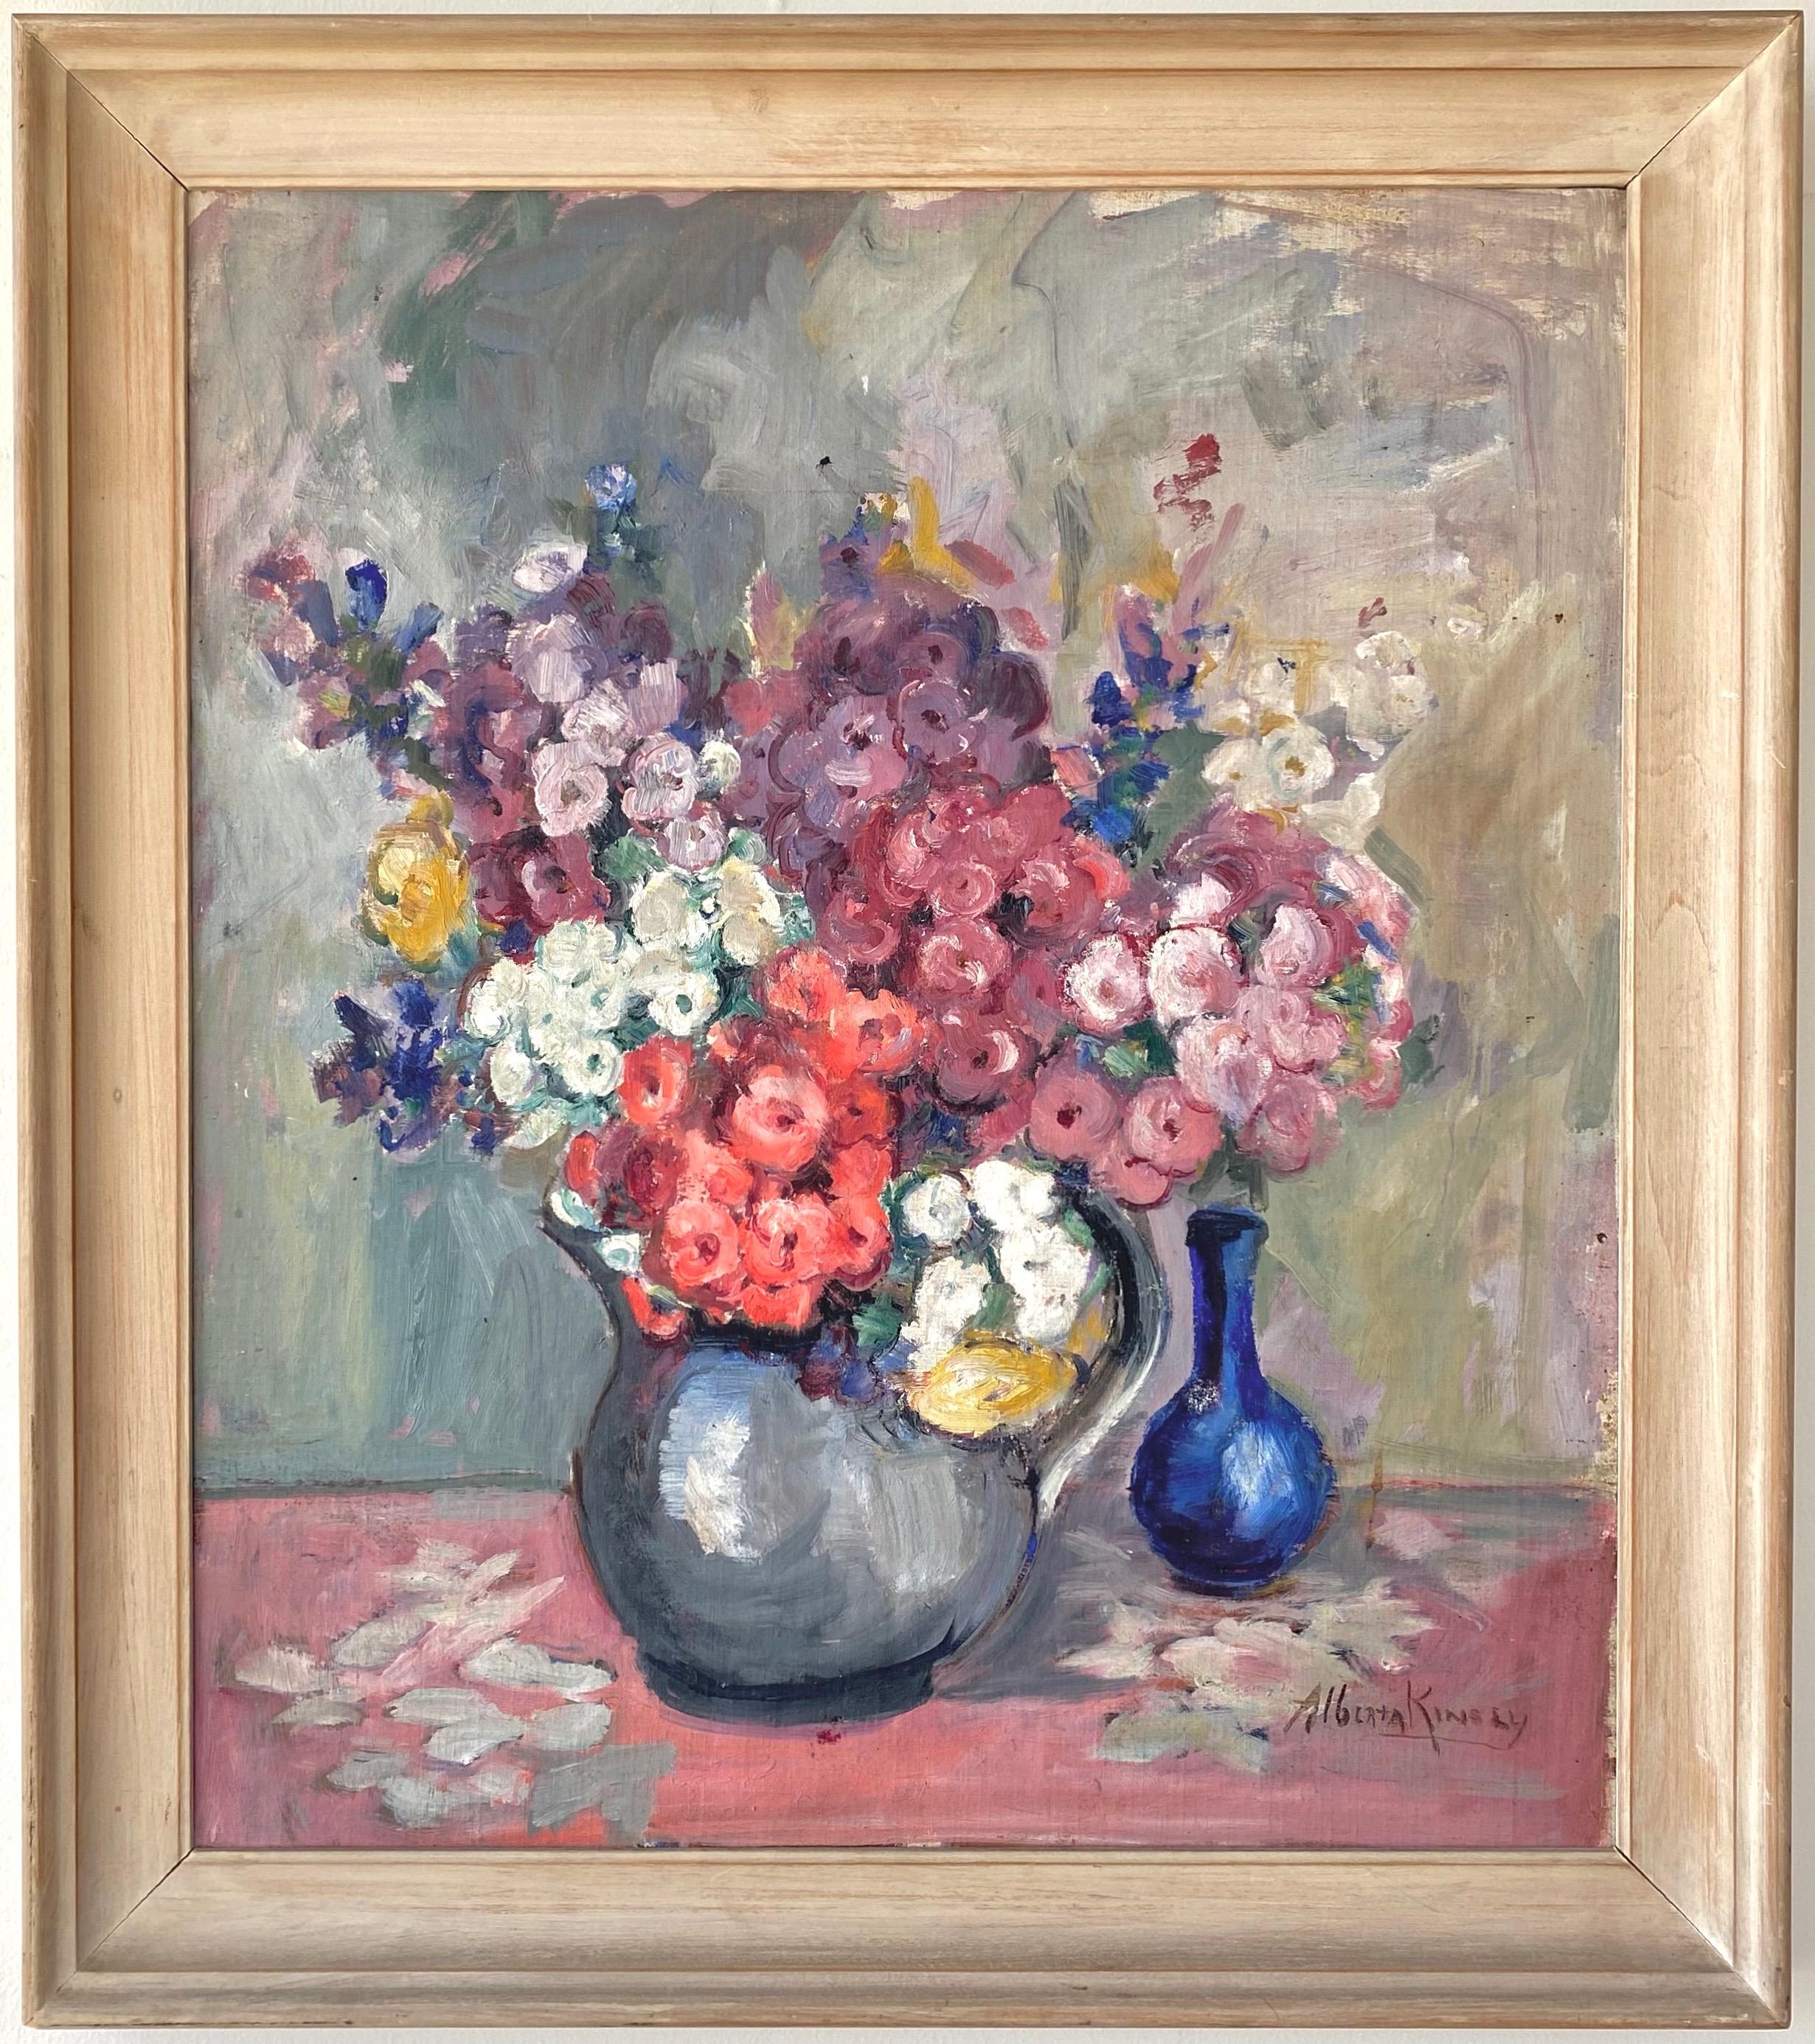 A 1920s floral still life impressionist oil painting on canvas on board by important New Orleans artist Alberta Kinsey (b. 1875–1952).

Densely arranged berry-hued bouquet with white clusters and yellow accents explodes out of a silver pitcher.